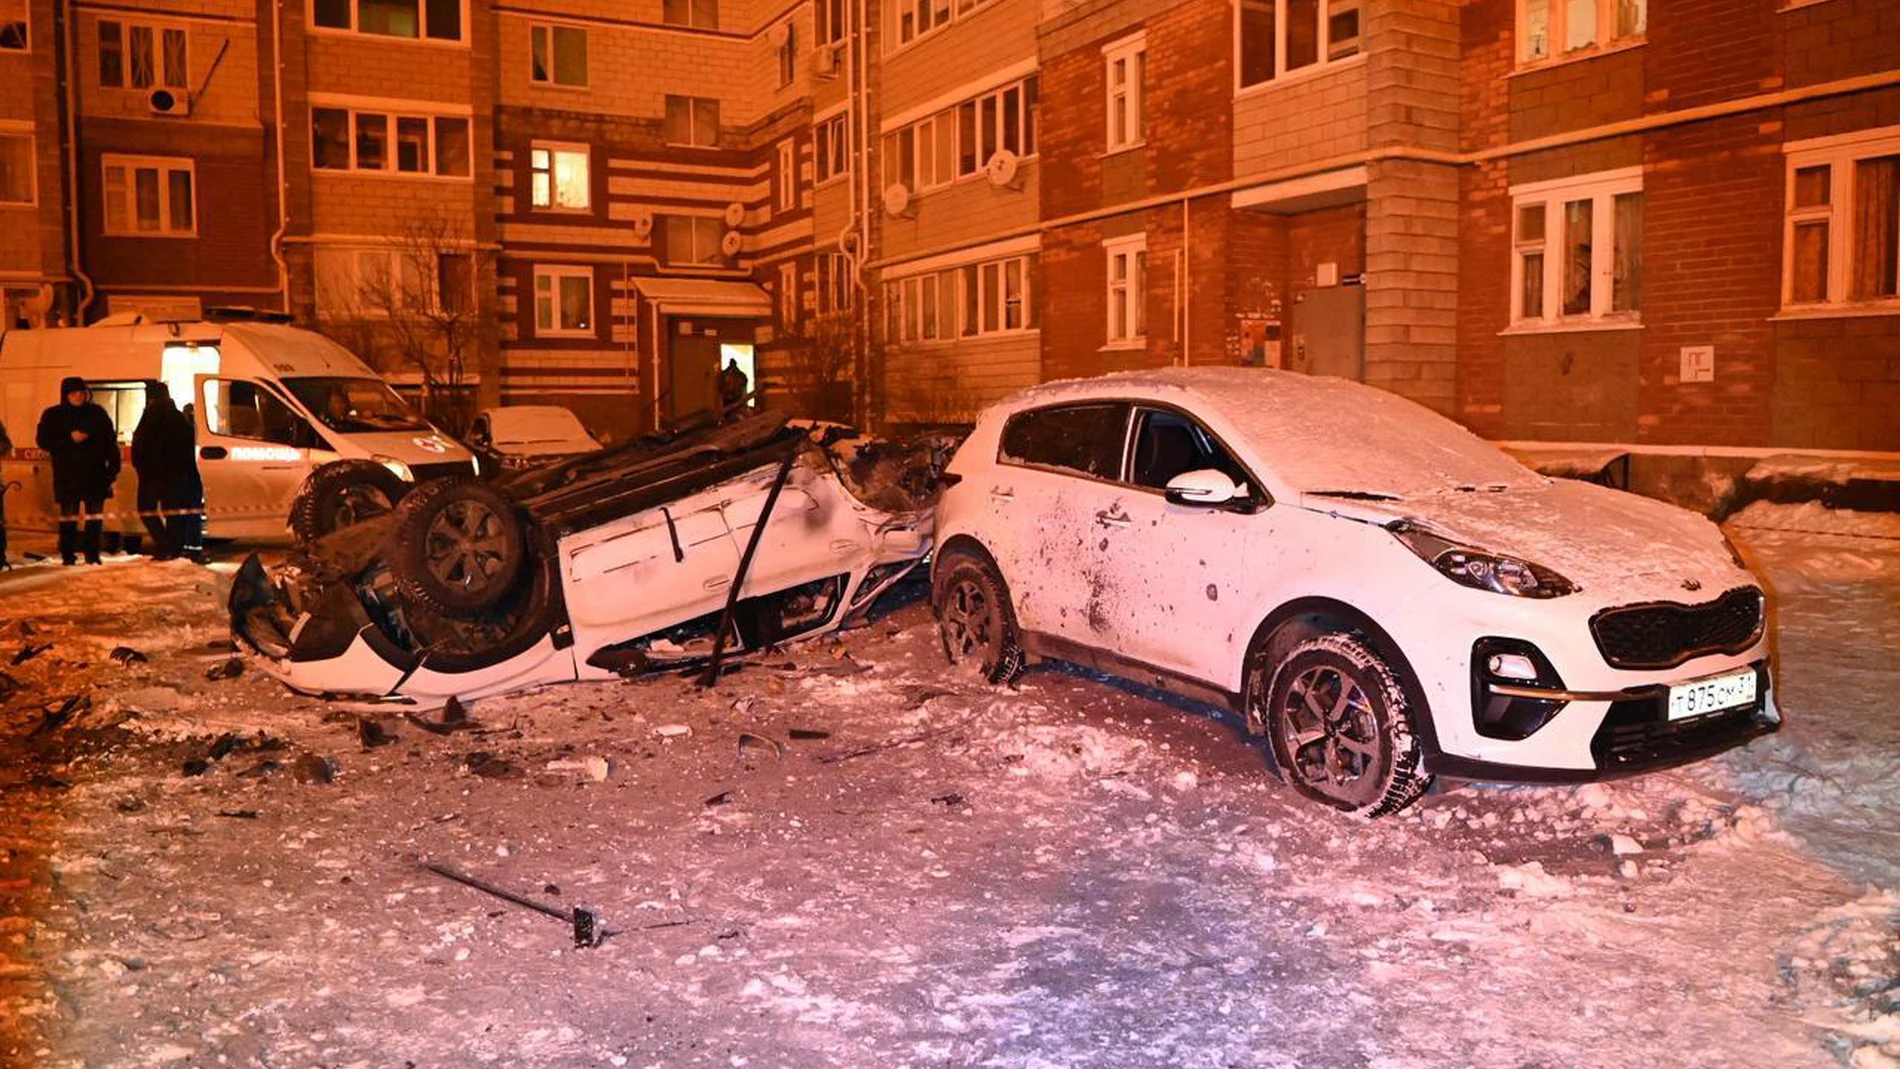 Belgorod (Russian Federation), 05/01/2024.- A handout photo made available by the official telegram channel of Mayor of Belgorod Valentin Demidov shows damaged cars after shelling in Belgorod, Russia, 05 January 2024. Two people were injured due to shelling by the Ukrainian Armed Forces, Mayor of Belgorod Valentin Demidov wrote on telegram. On 24 February 2022, Russian troops entered Ukrainian territory in what the Russian president declared a 'special military operation', starting an armed c...